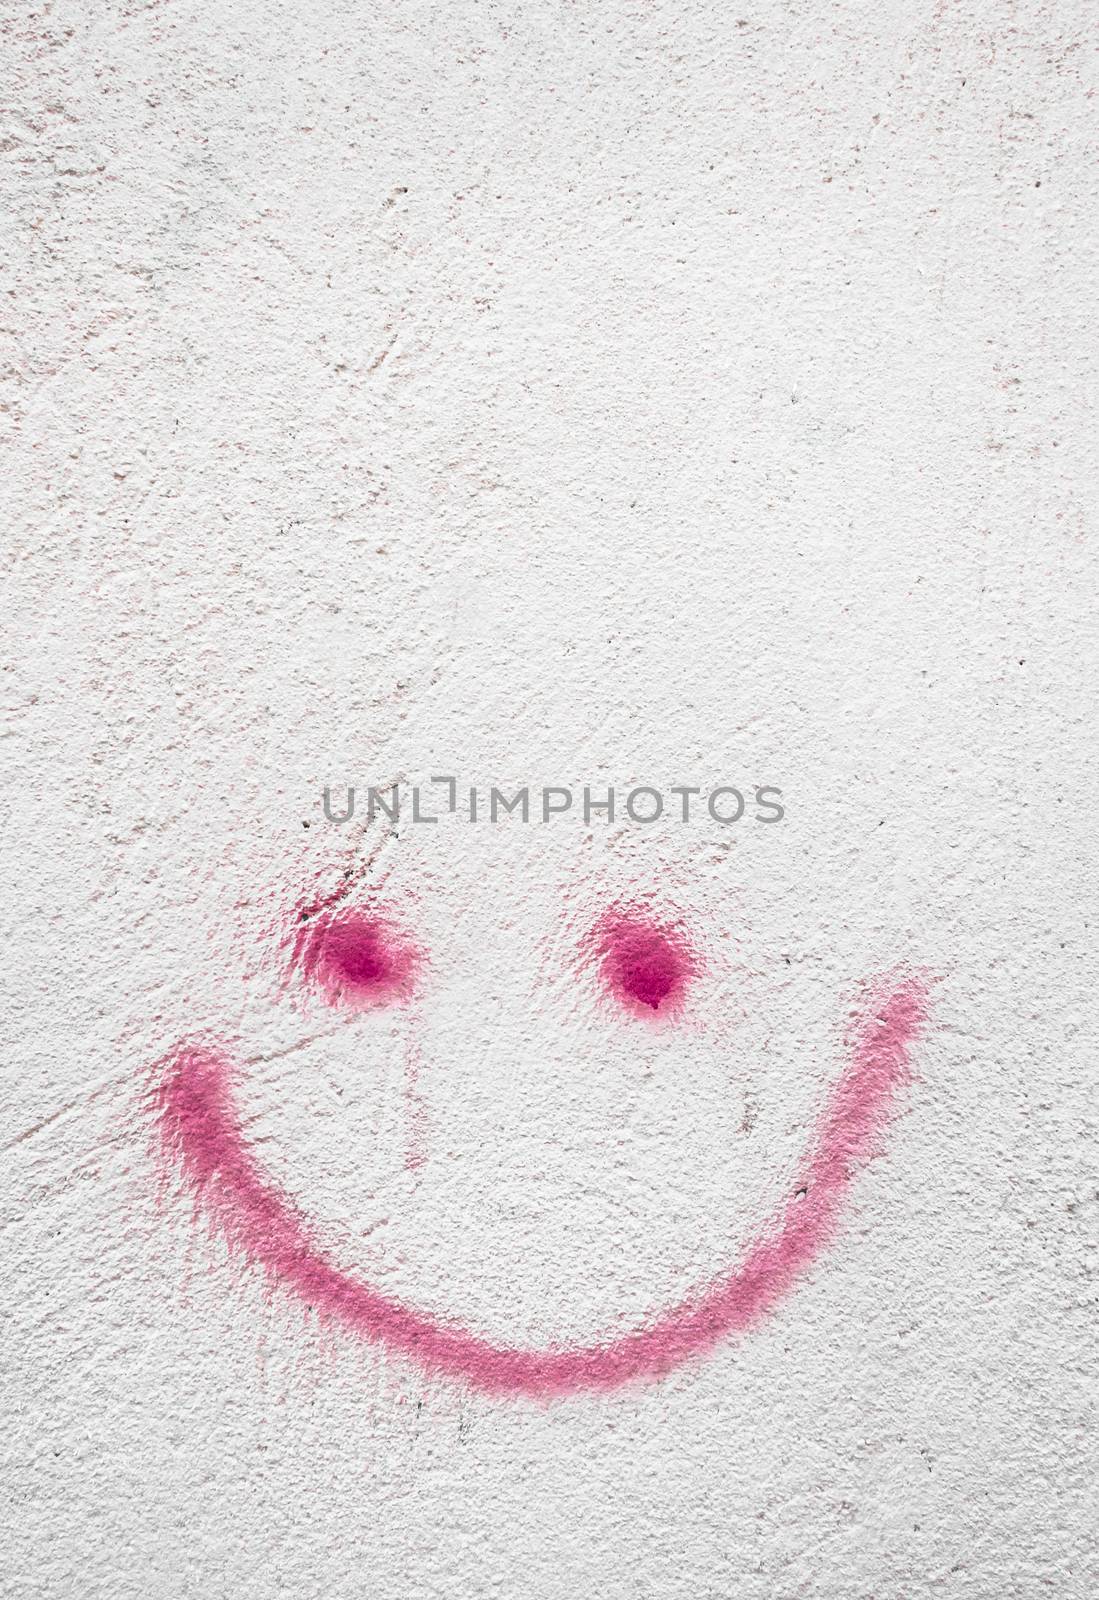 Concrete wall with red smiley, background for many uses.